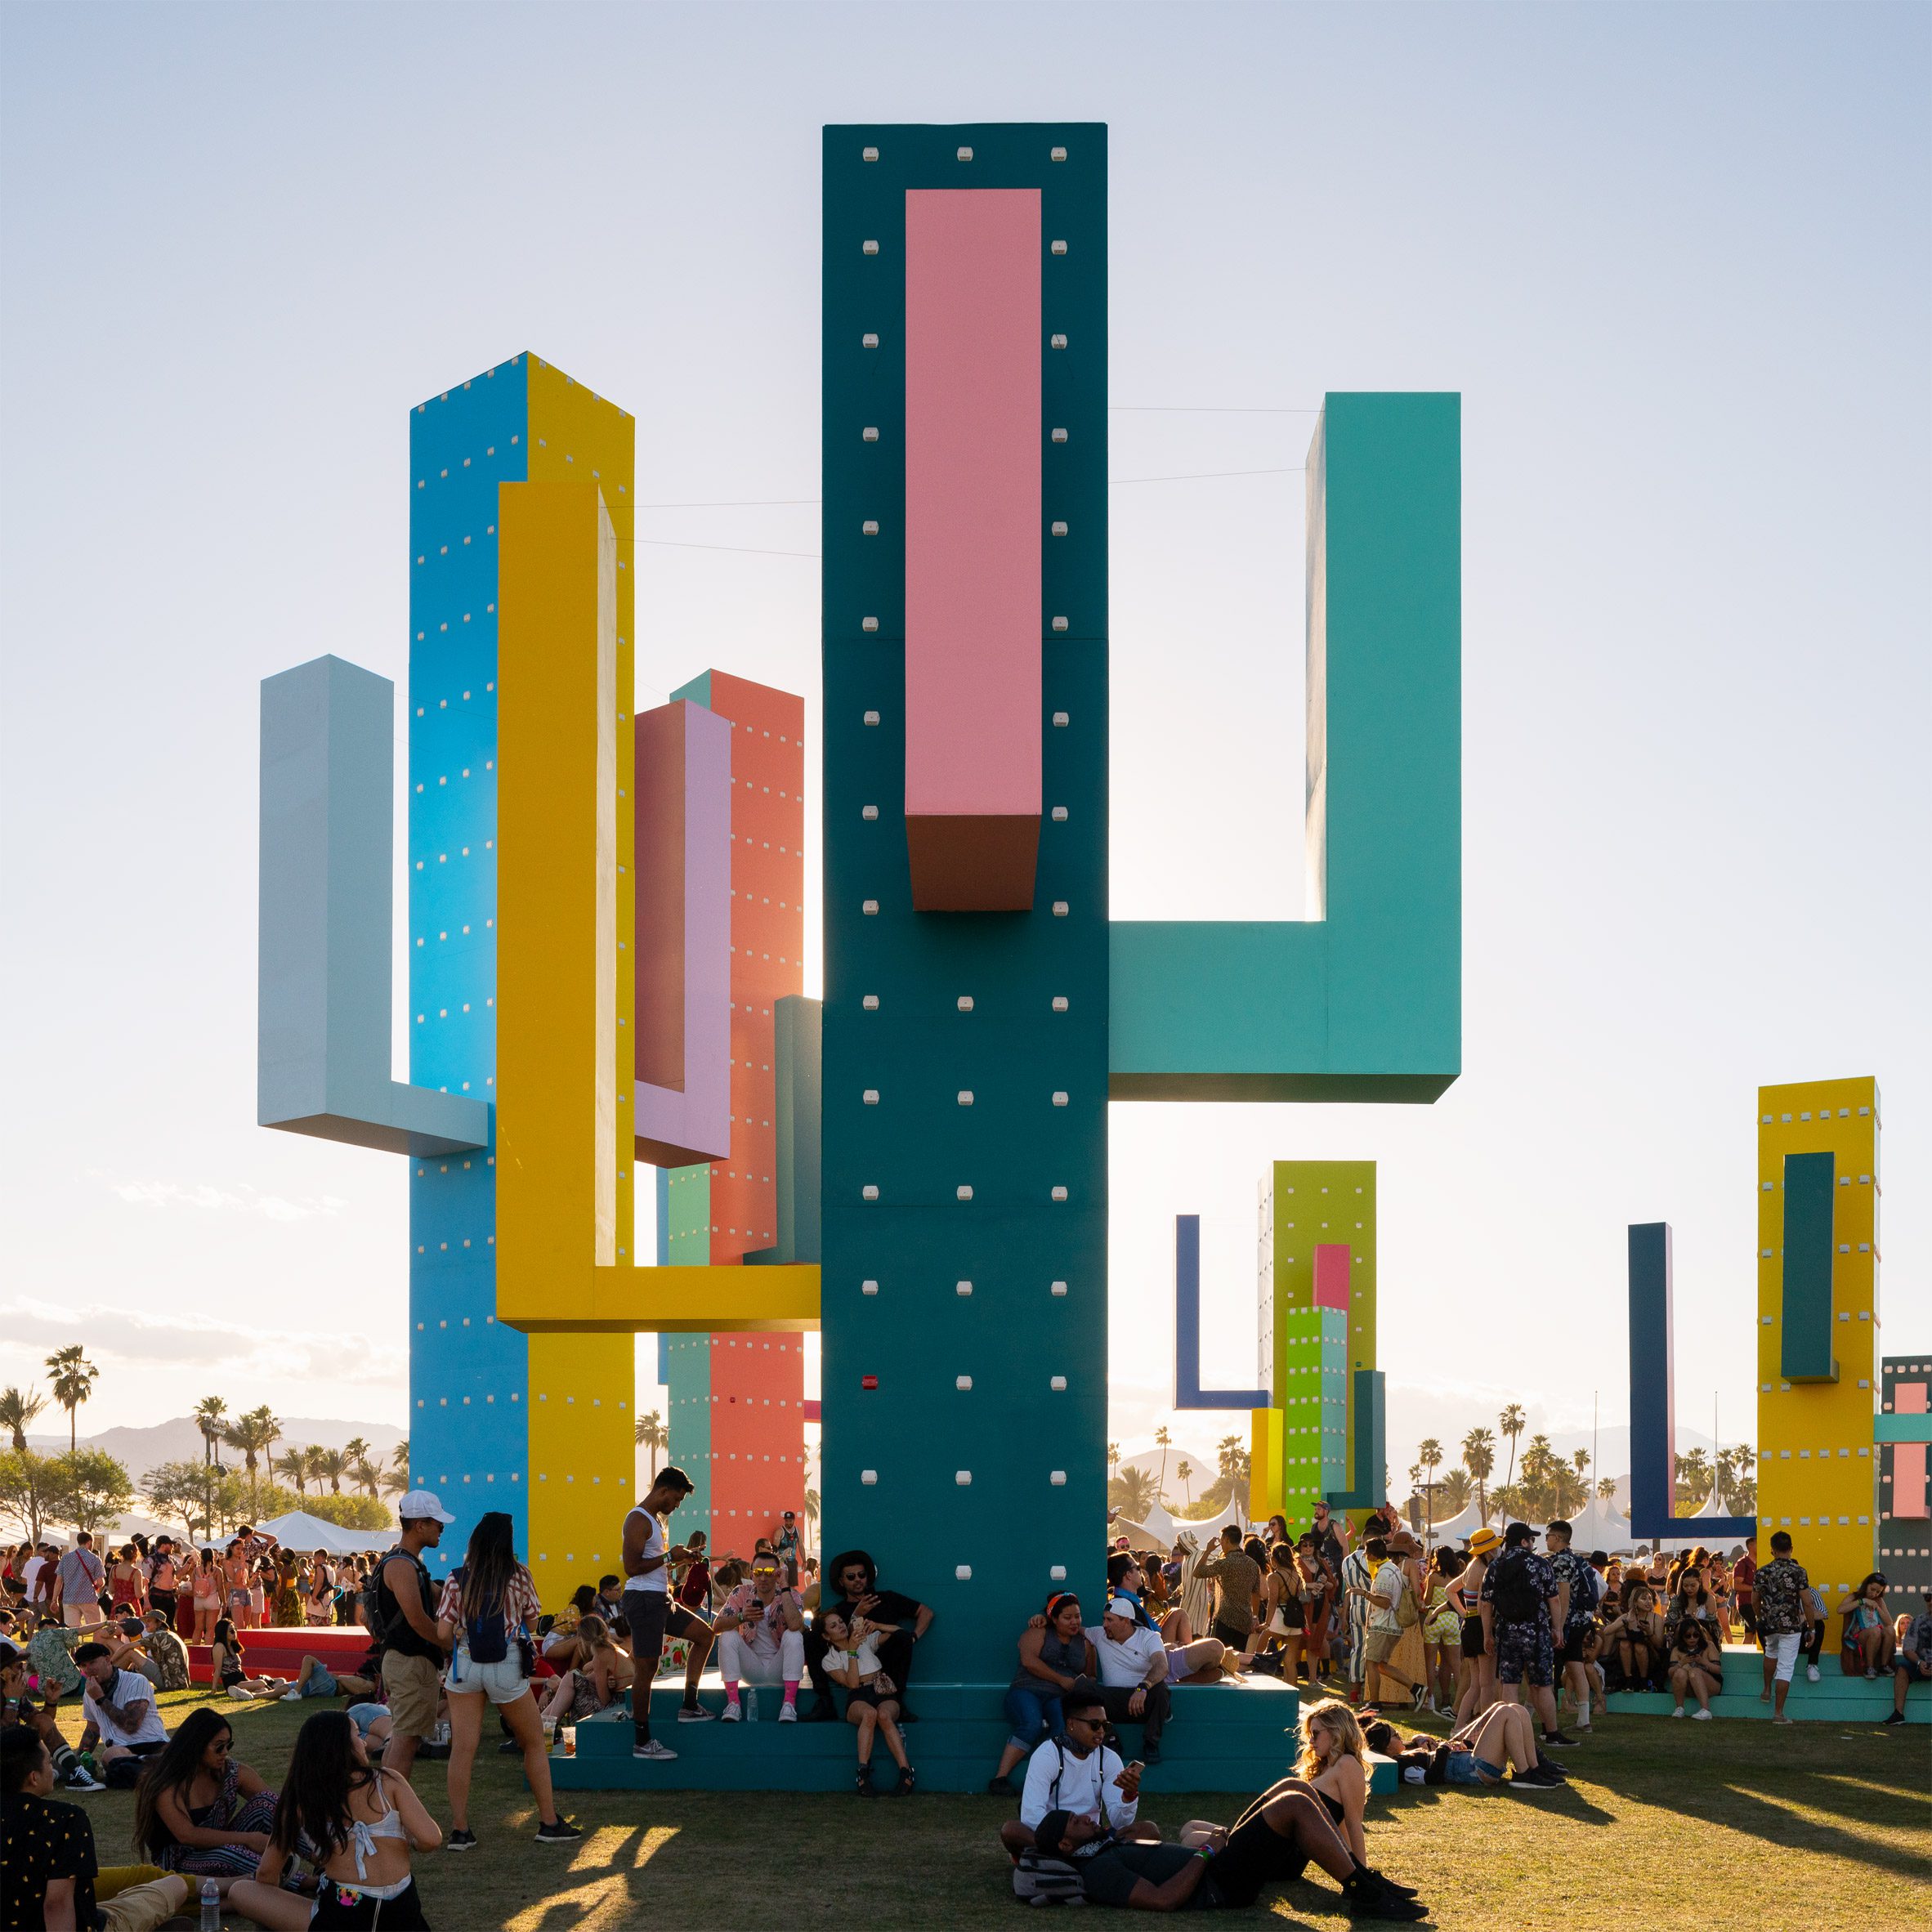 Seating installation by Office Kovacs for Coachella festival, USA, 2019